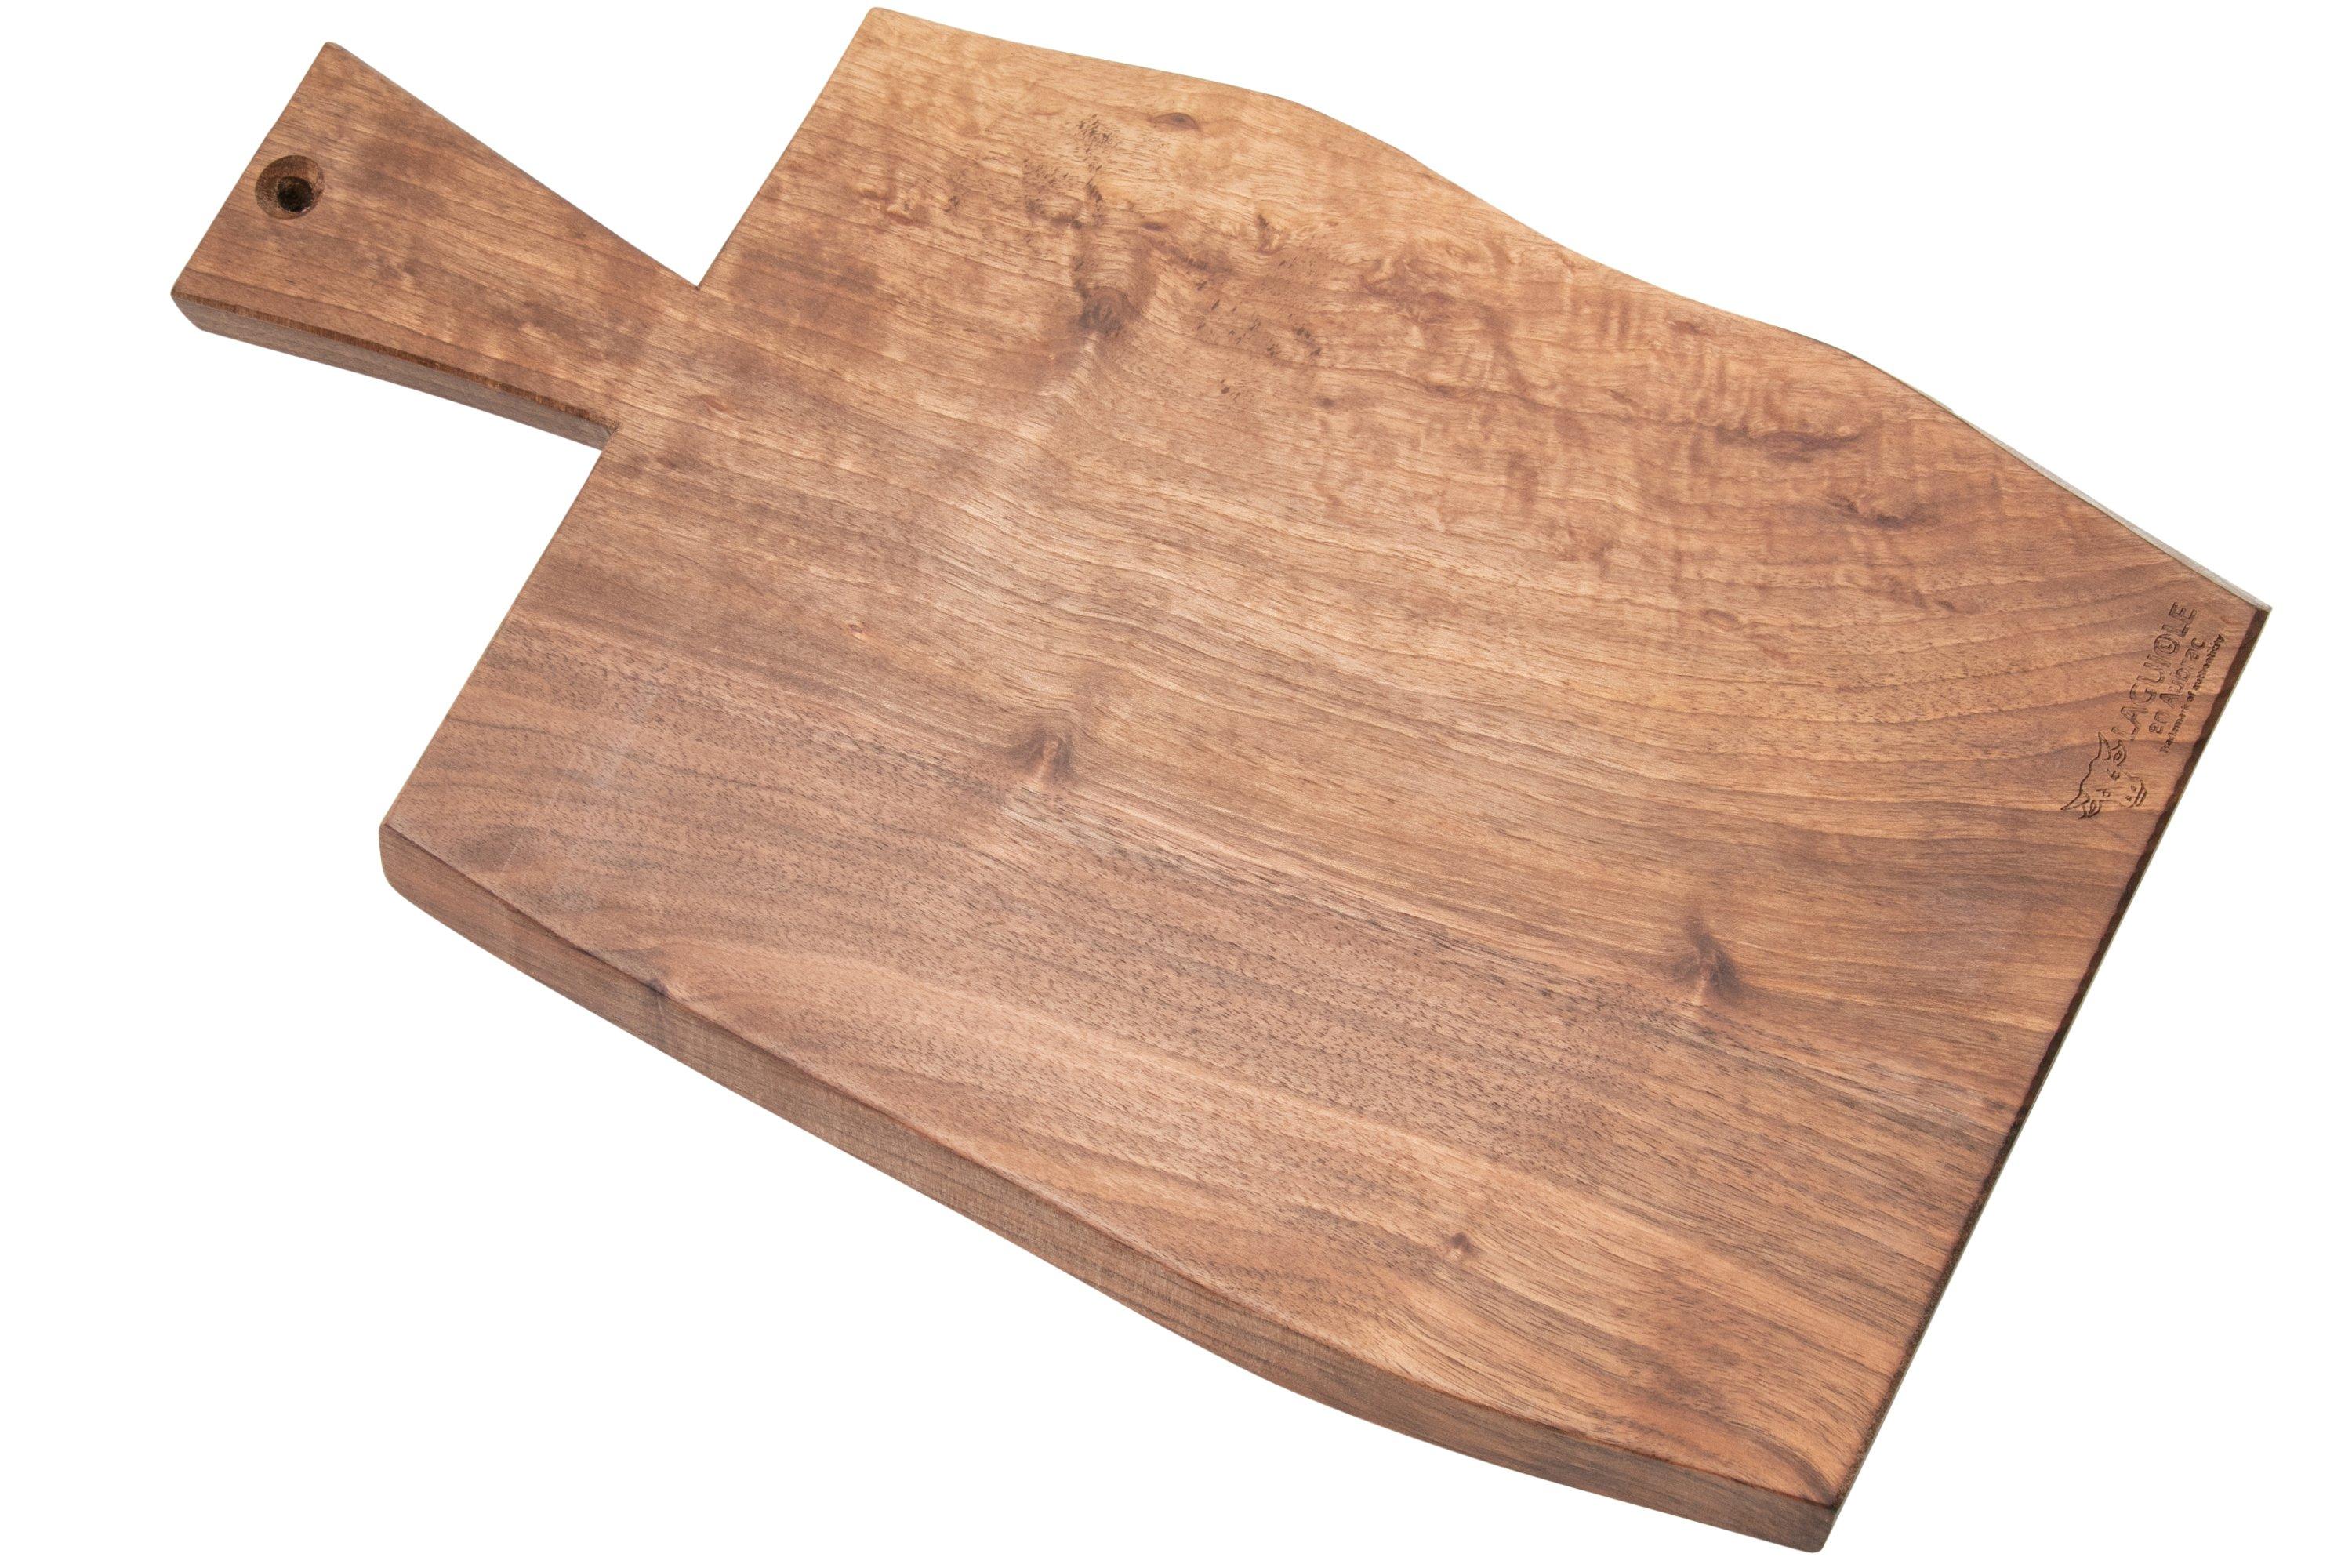 Extra Large Walnut Cutting Board With Rubber Feet, Pocket Handles